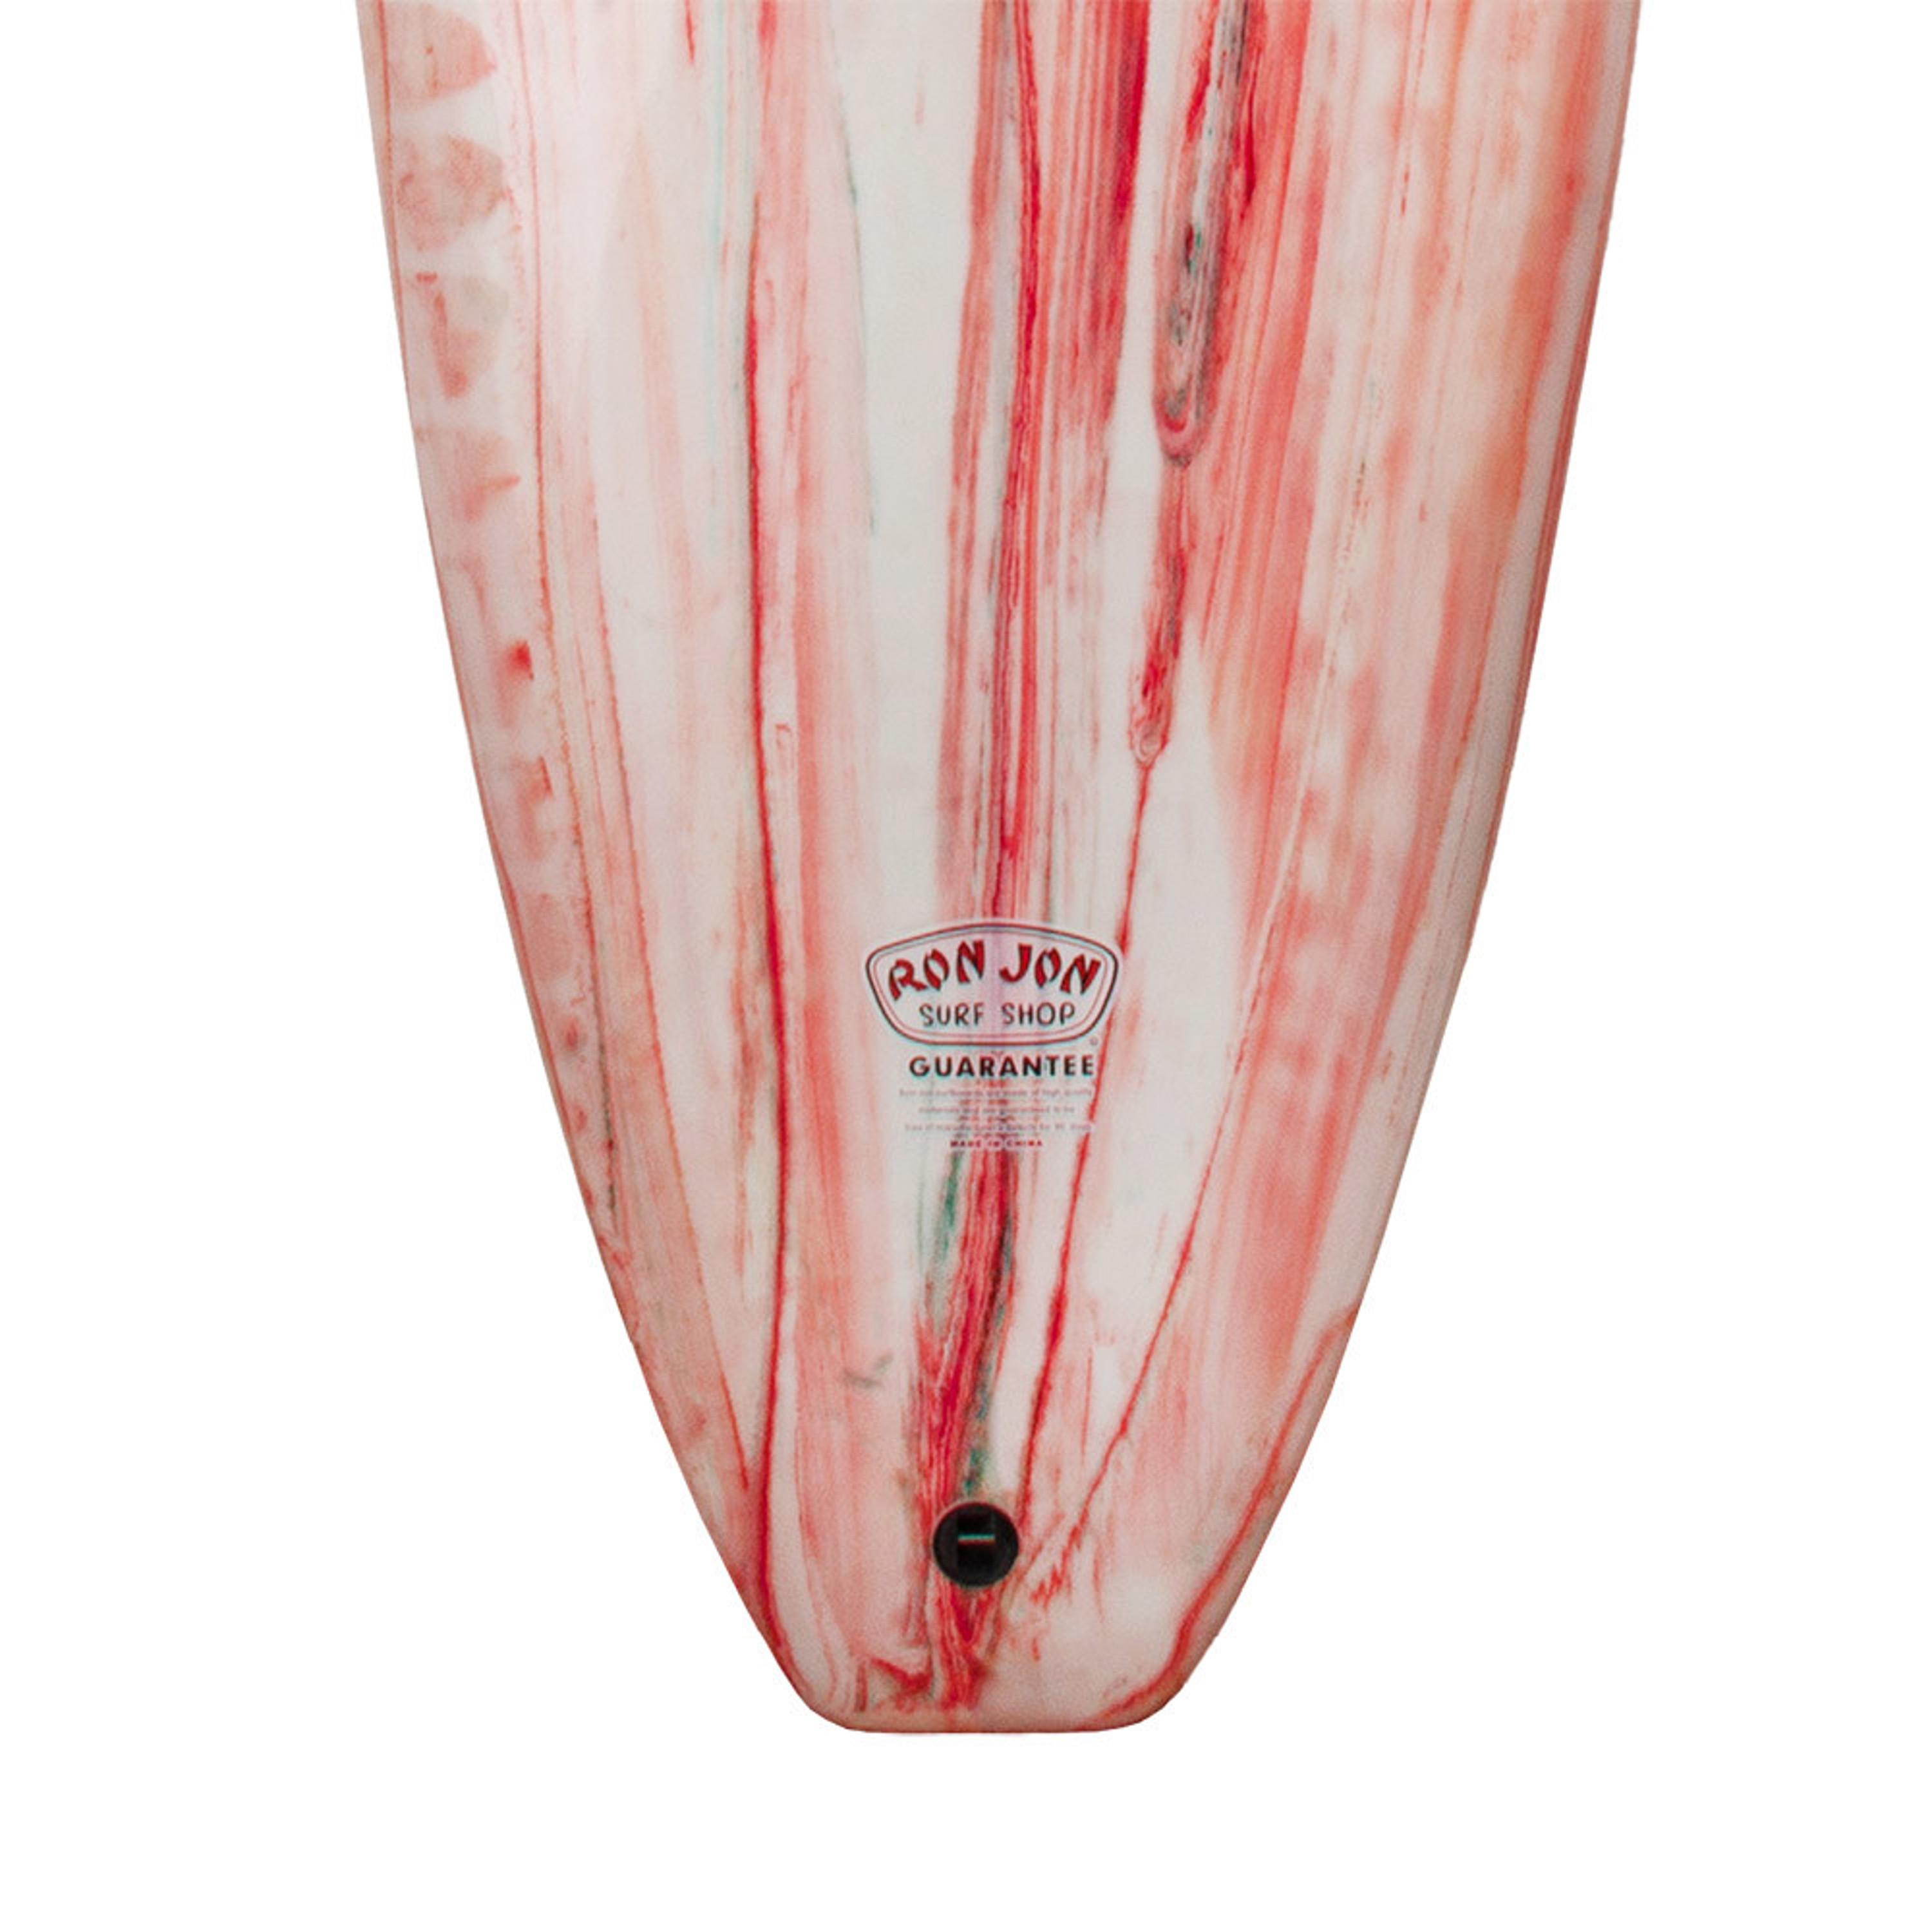 Ghost Bright Surfboard clear Epoxy Resin